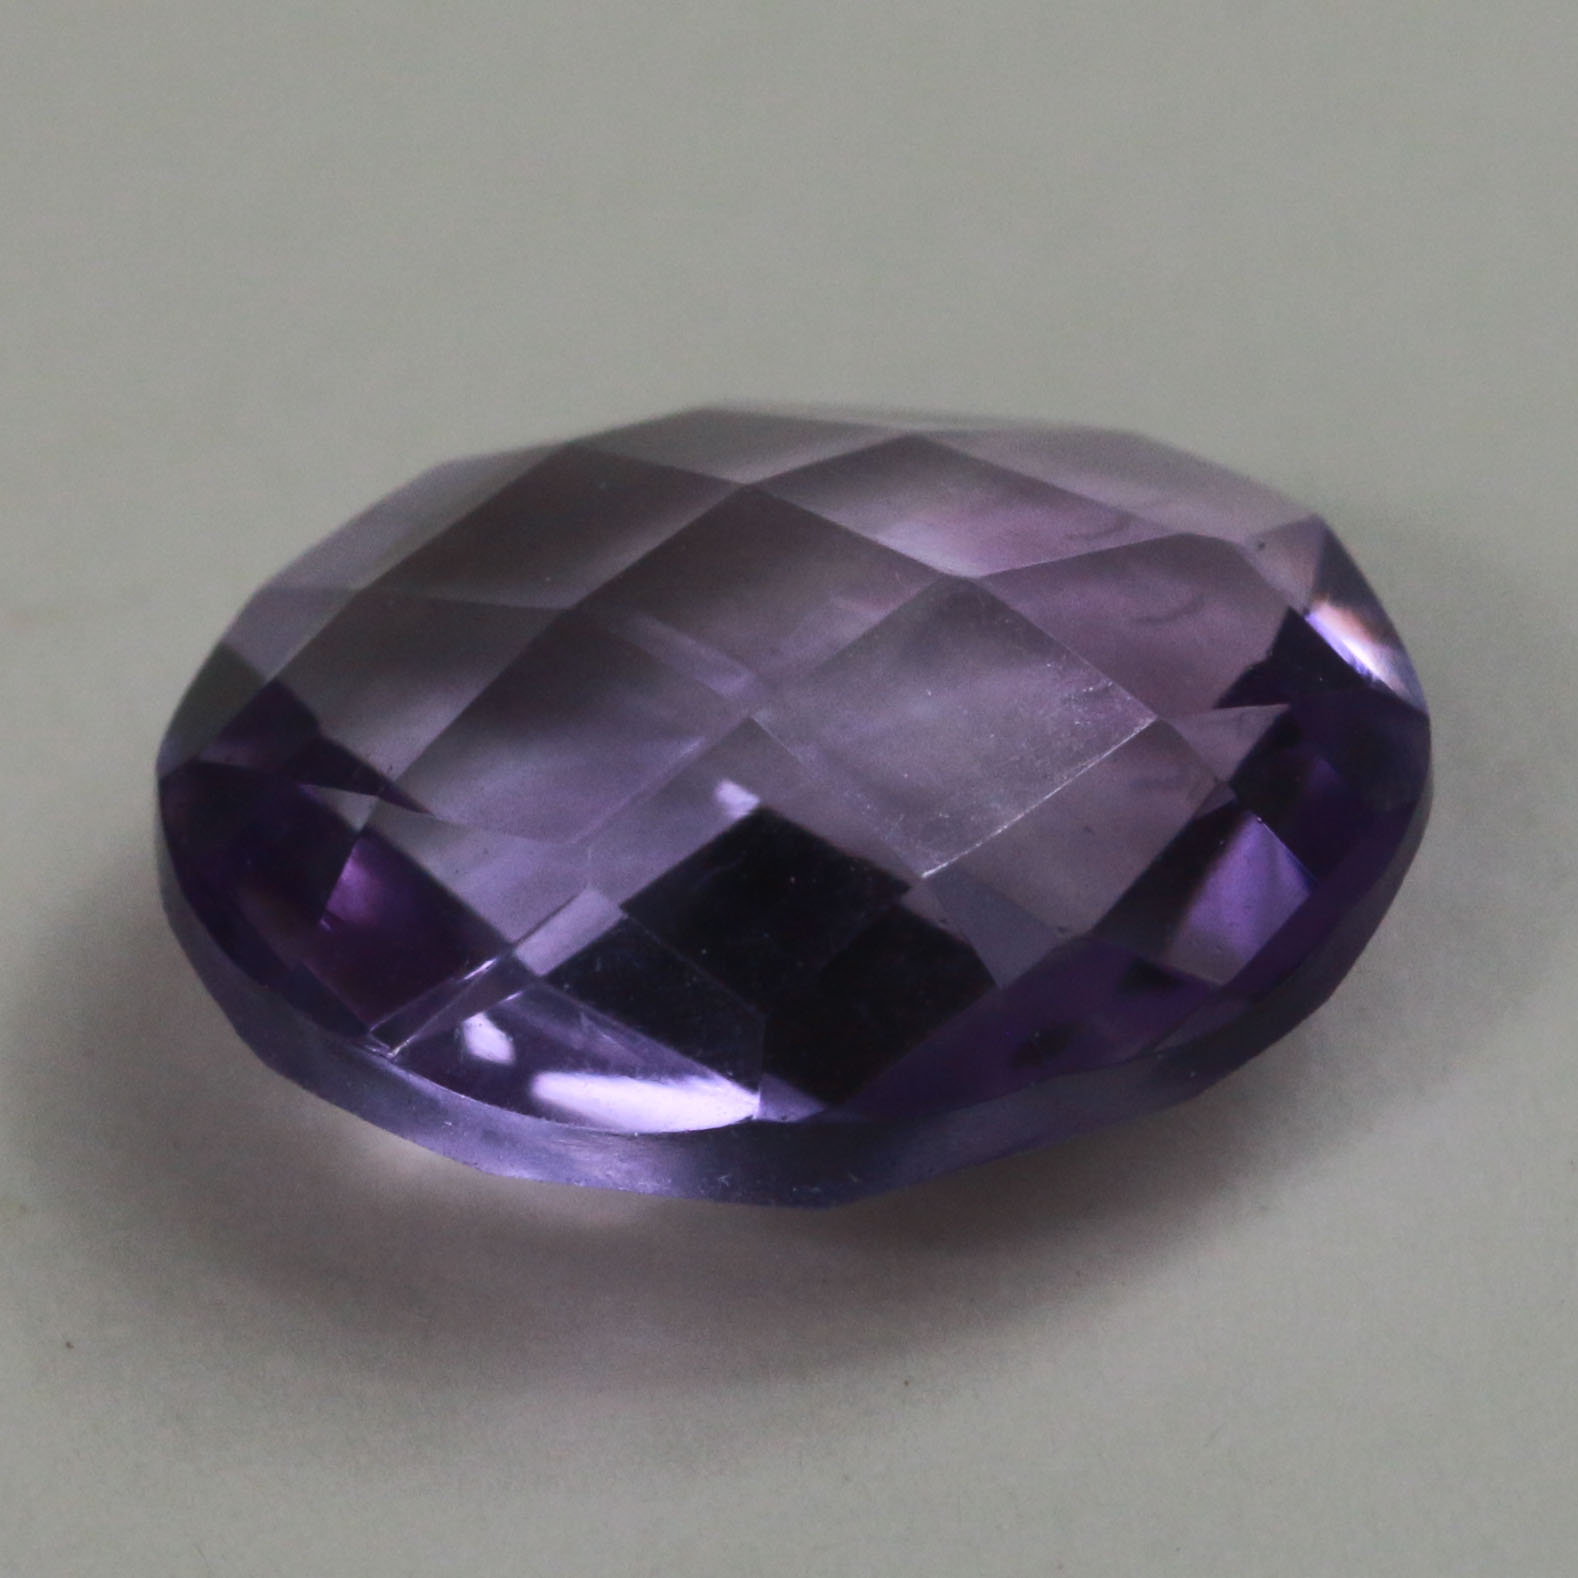 10X8 OVAL BRIOLETTE UNDRILLED AMETHYST LIGHT